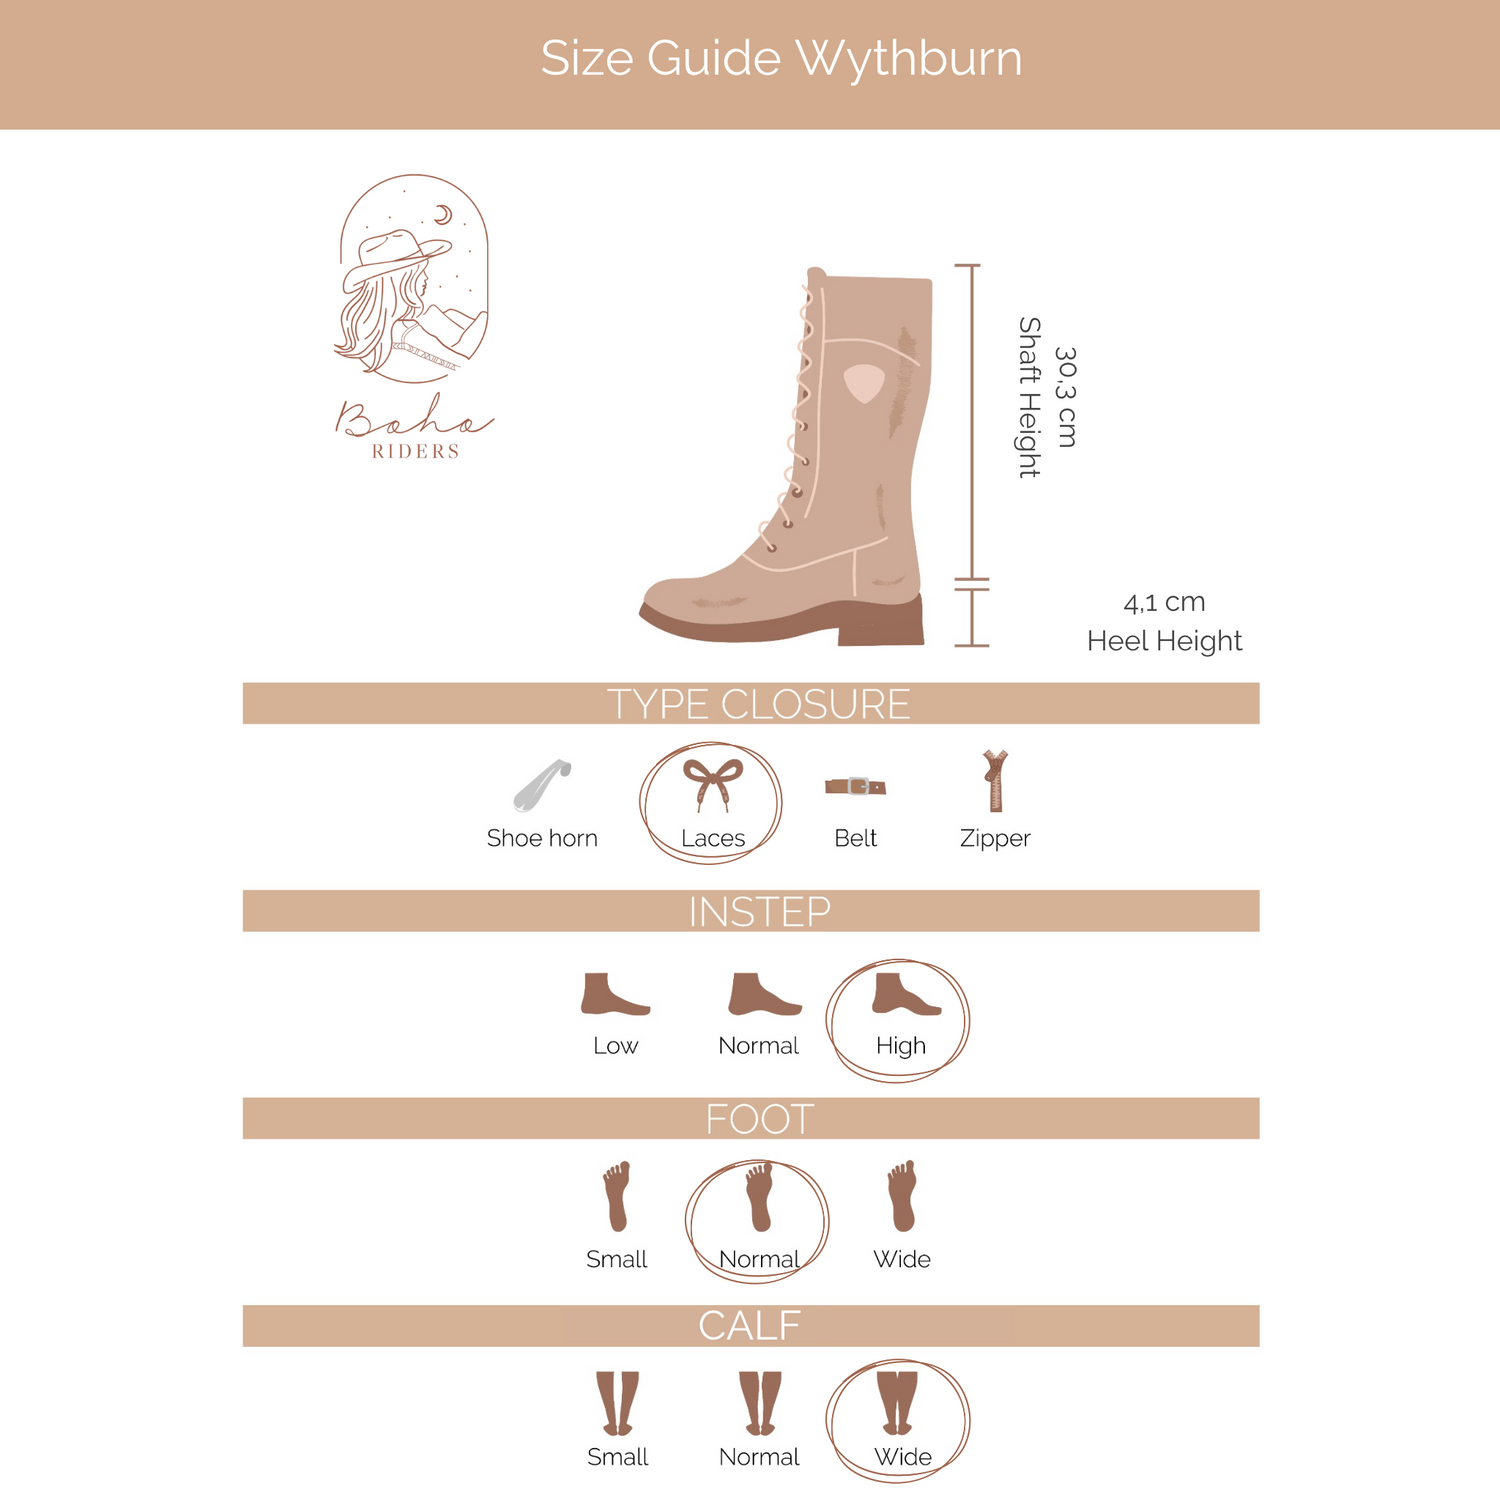 What you want to know about the fit ofAriat Wythburn H2O Waterproof - Riding Boots - Outdoor Boots - Insulated Java - Thinsulate™ Inner Lining 